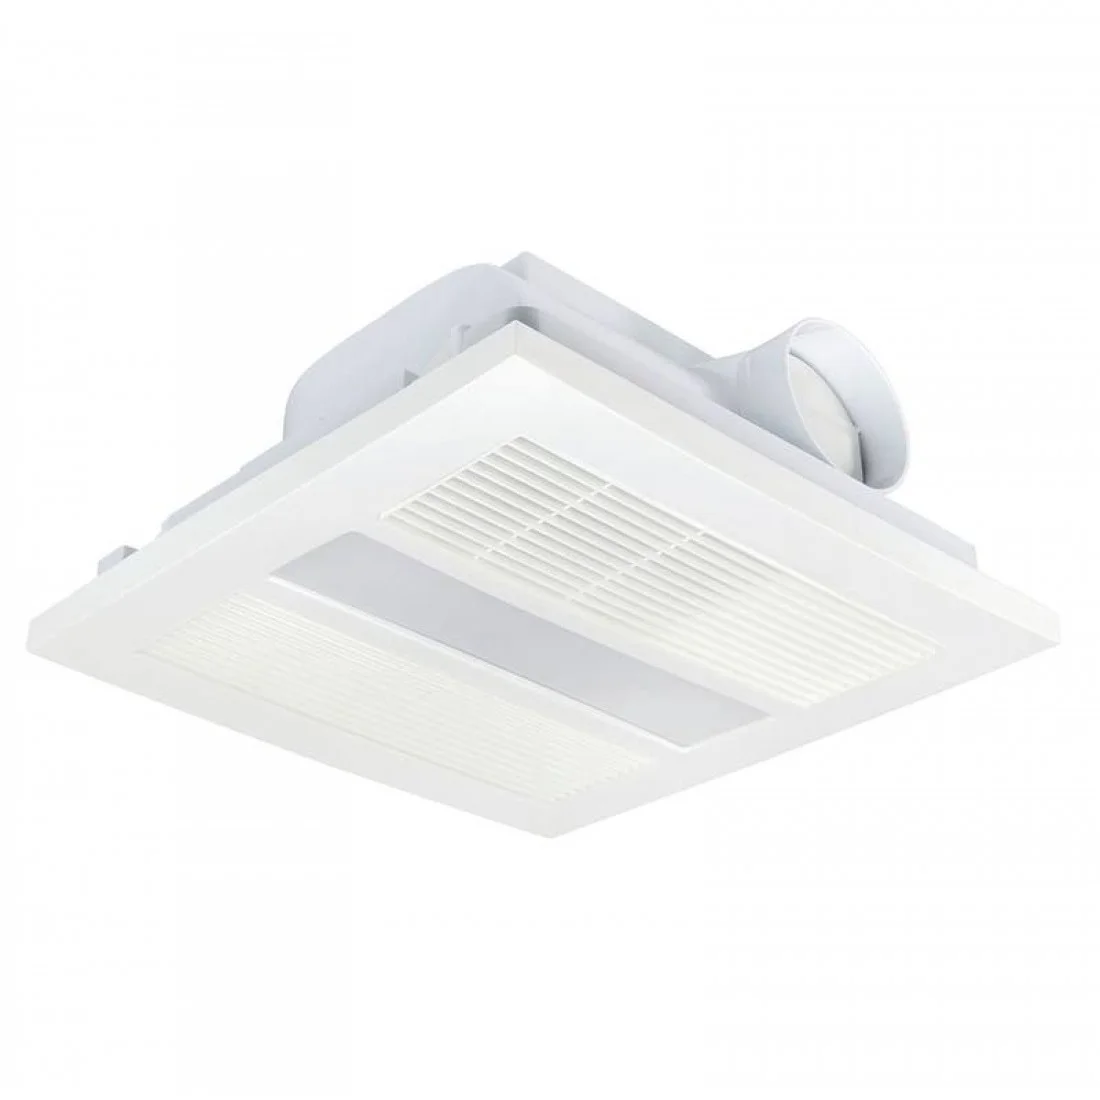 21476 Solace Heat Light and Fan 4 in 1 White